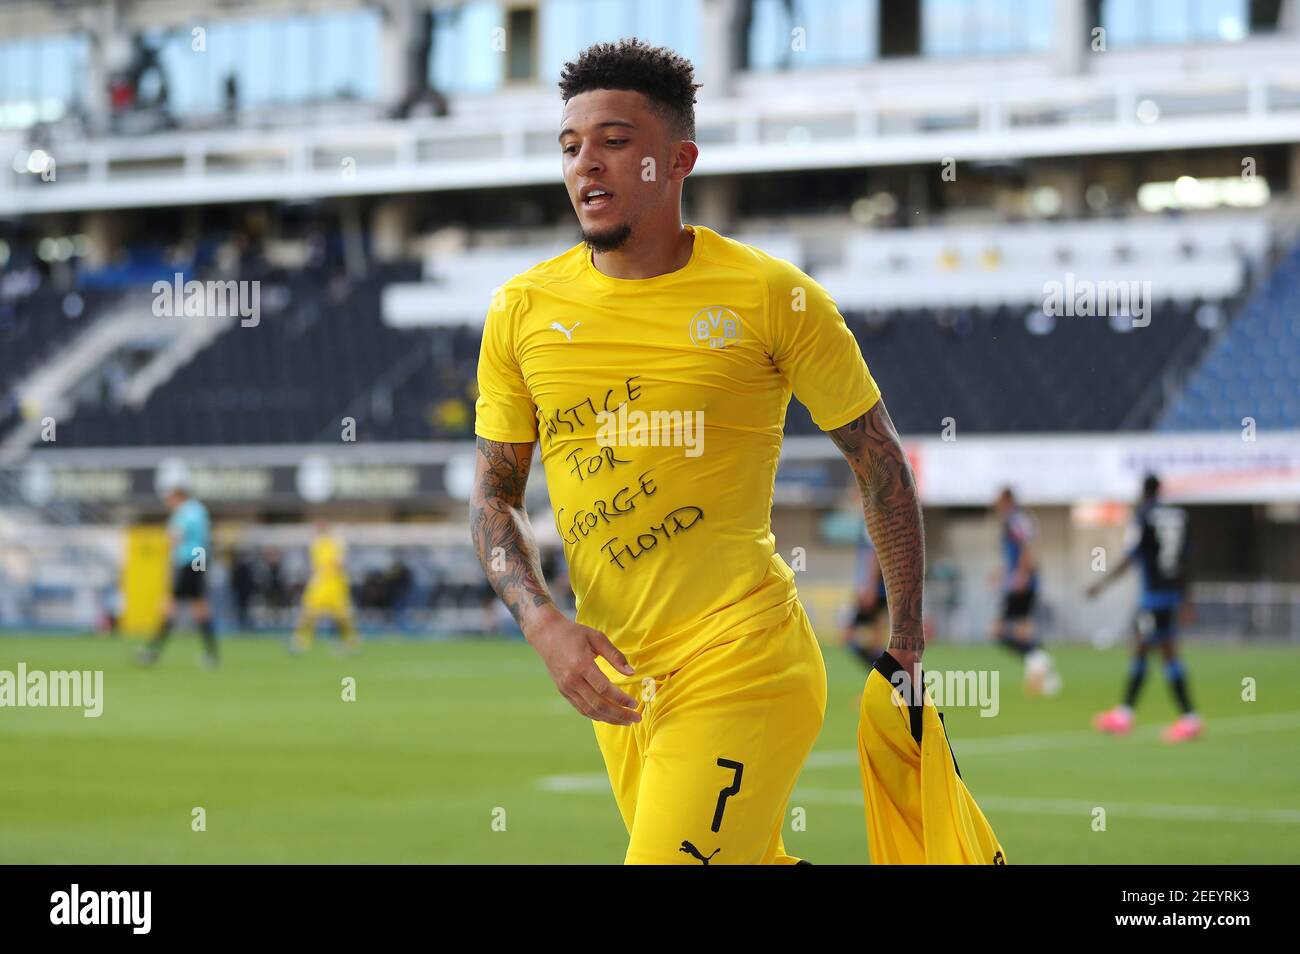 Soccer Football - Bundesliga - SC Paderborn v Borussia Dortmund - Benteler Arena, Paderborn, Germany - May 31, 2020 Borussia Dortmund's Jadon Sancho celebrates scoring their second goal with a 'Justice for George Floyd' shirt, as play resumes behind closed doors following the outbreak of the coronavirus disease (COVID-19) Lars Baron/Pool via REUTERS   DFL regulations prohibit any use of photographs as image sequences and/or quasi-video Stock Photo